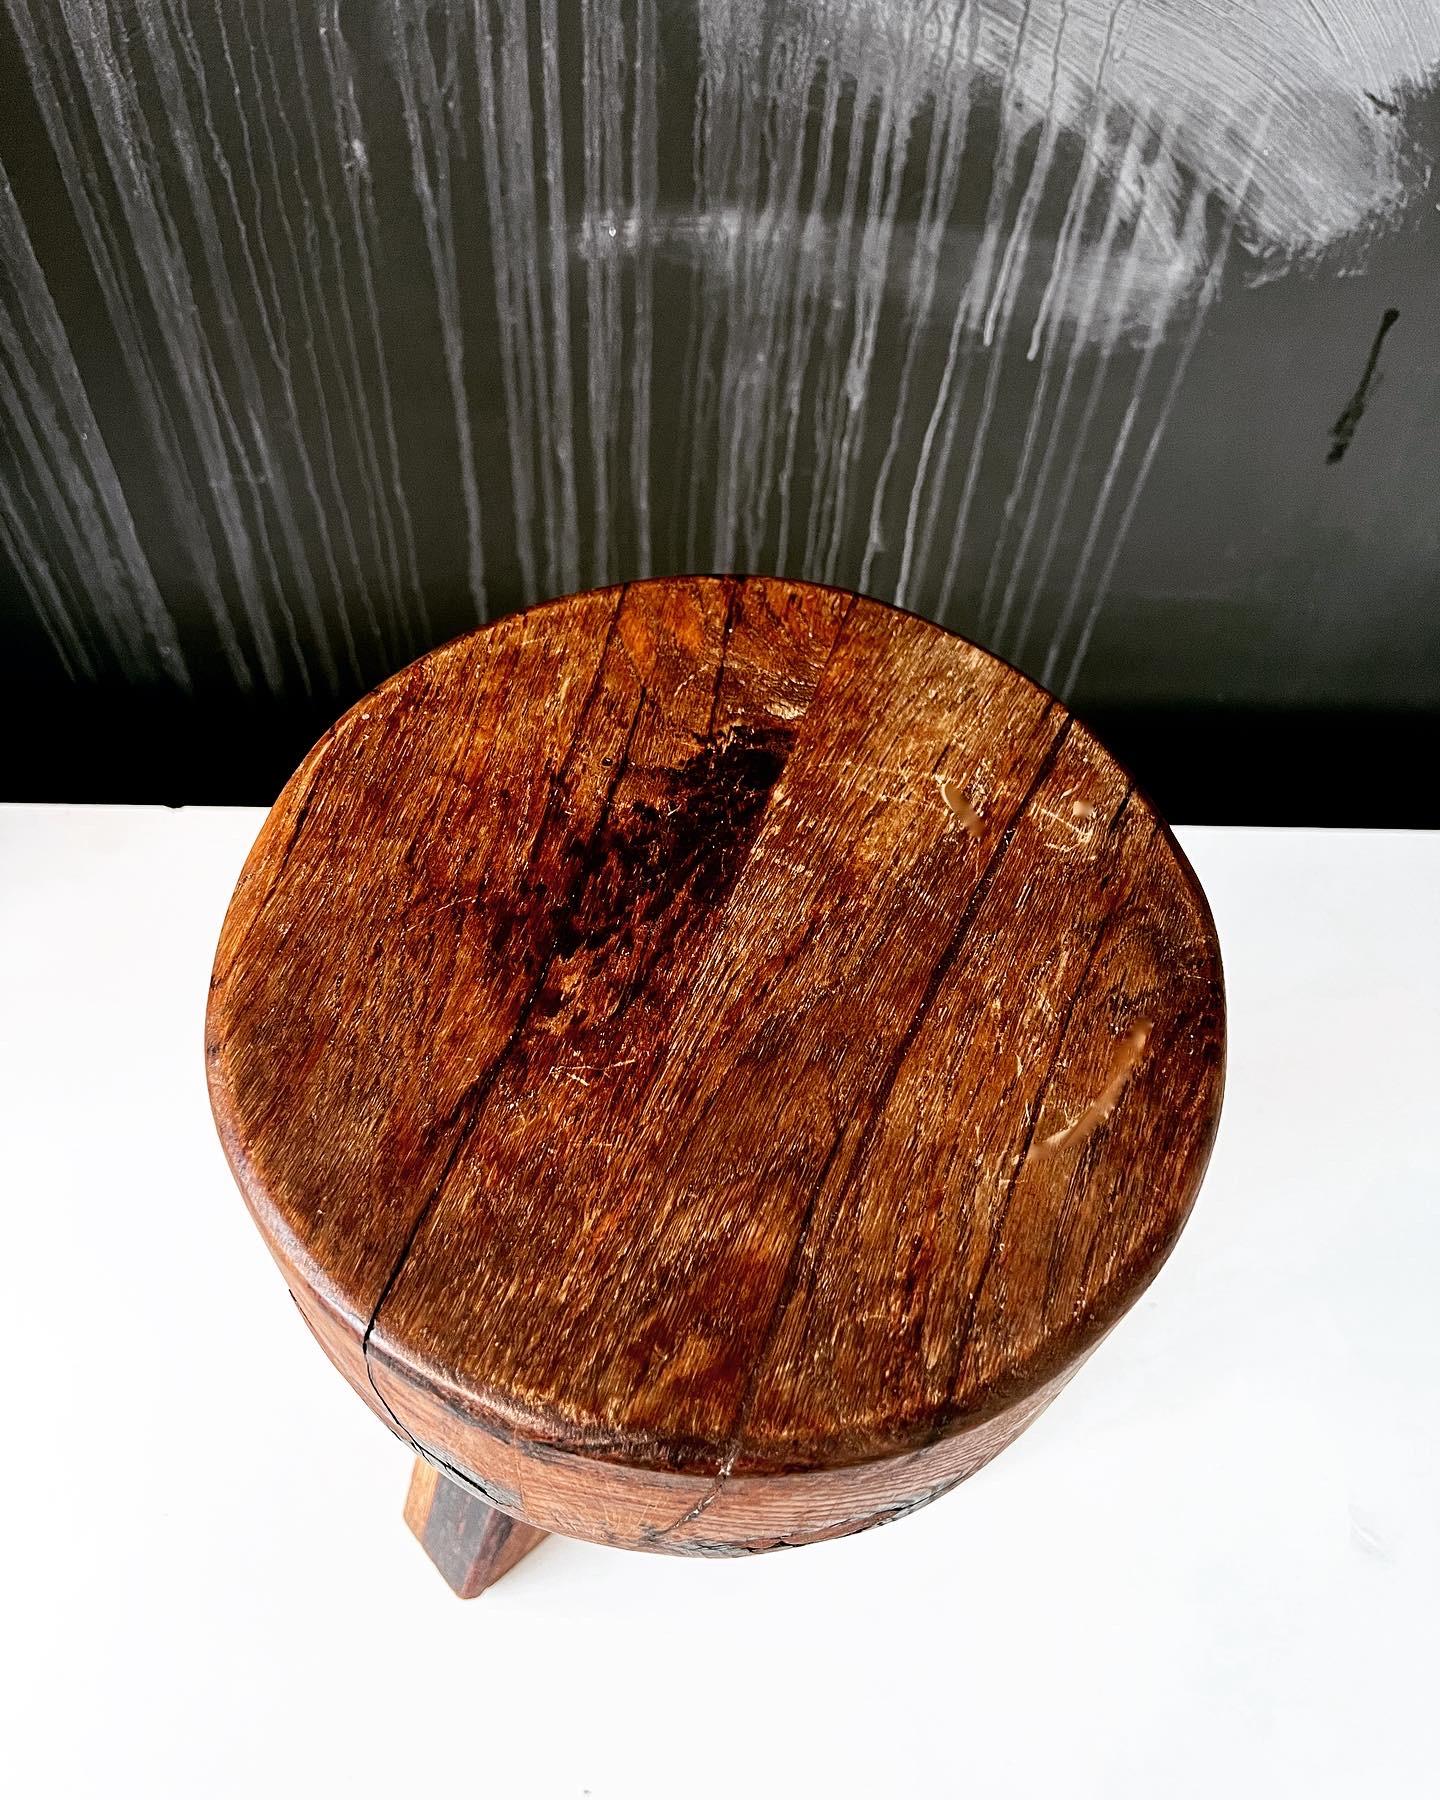 Interesting three legged naïve French stool in solid oak with beautiful patina. Colours vary from caramel to deep browns, almost black.

A great esthetically interesting interior piece.